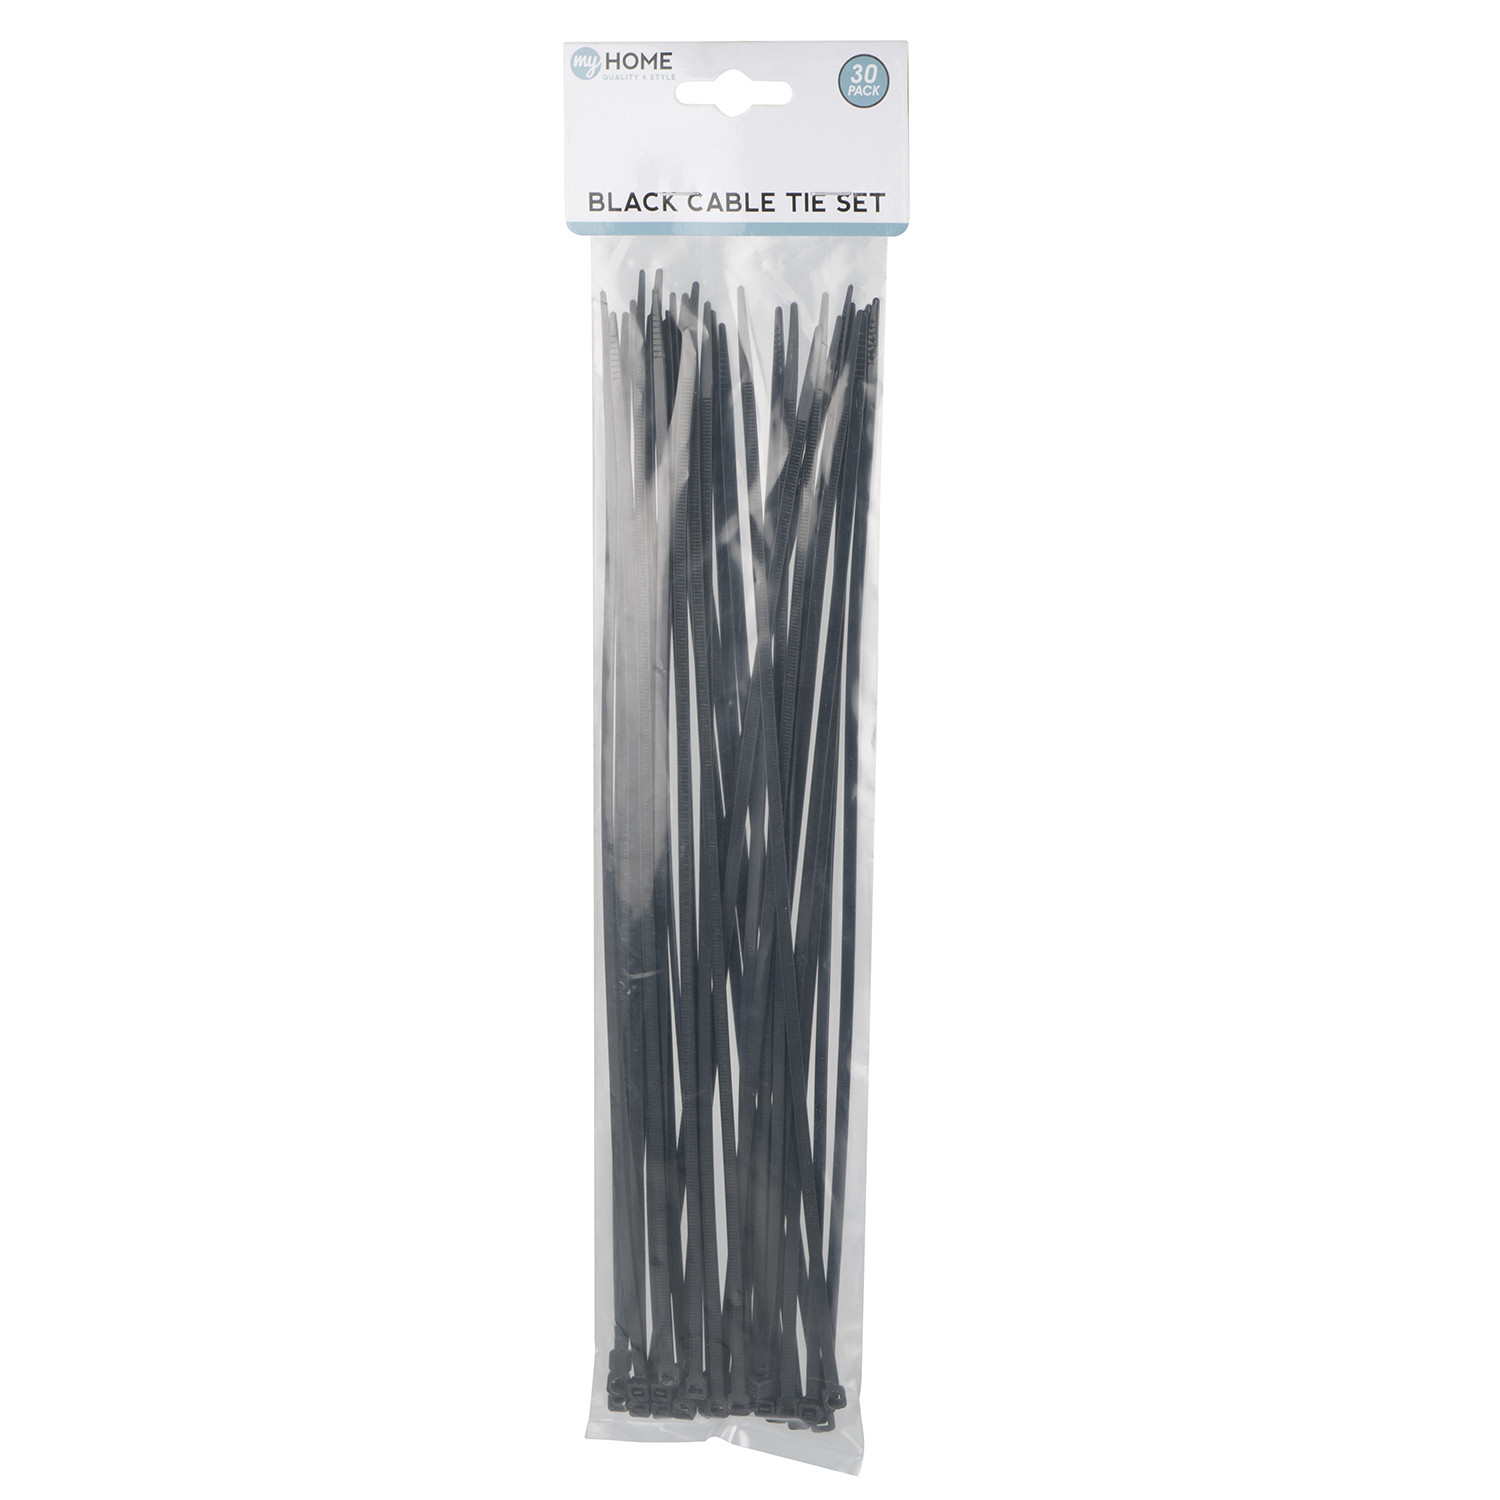 My Home Black Cable Tie Set 30 Pack Image